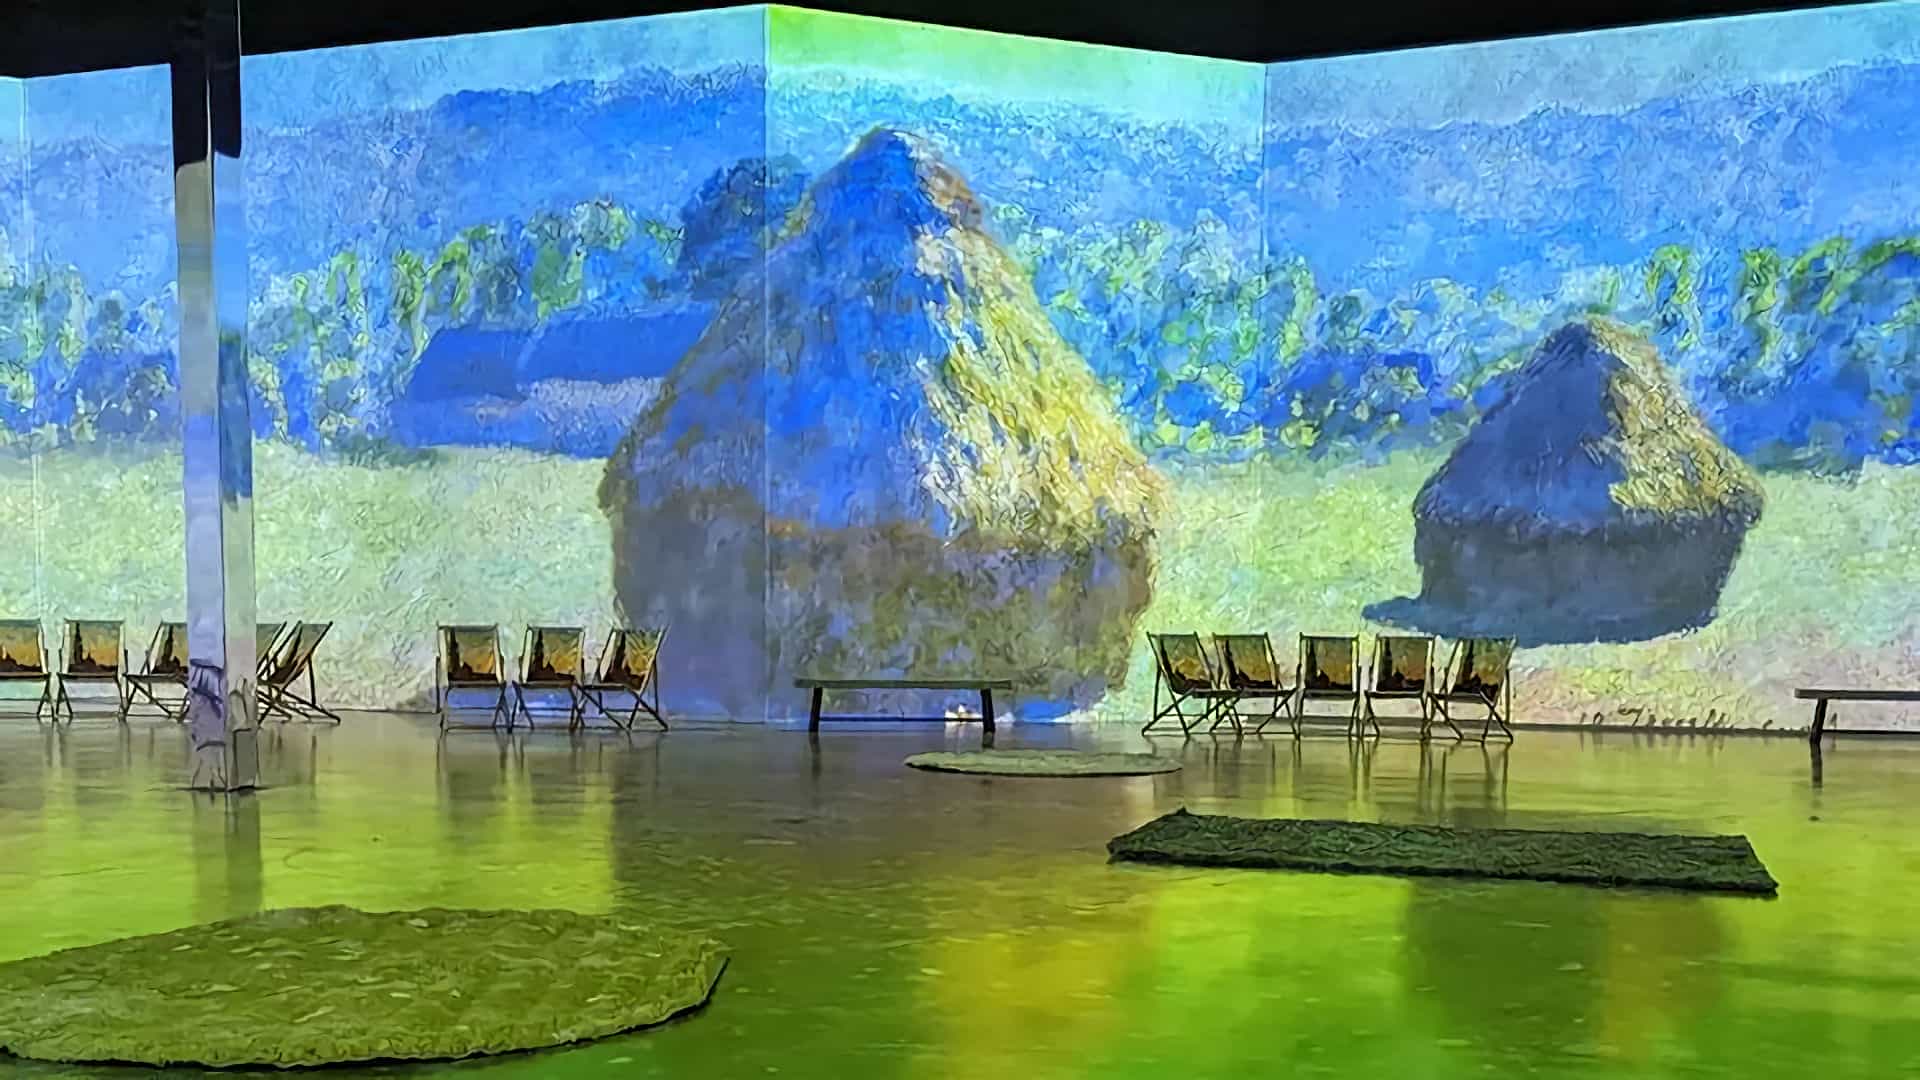 Claude Monet: The Immersive Experience